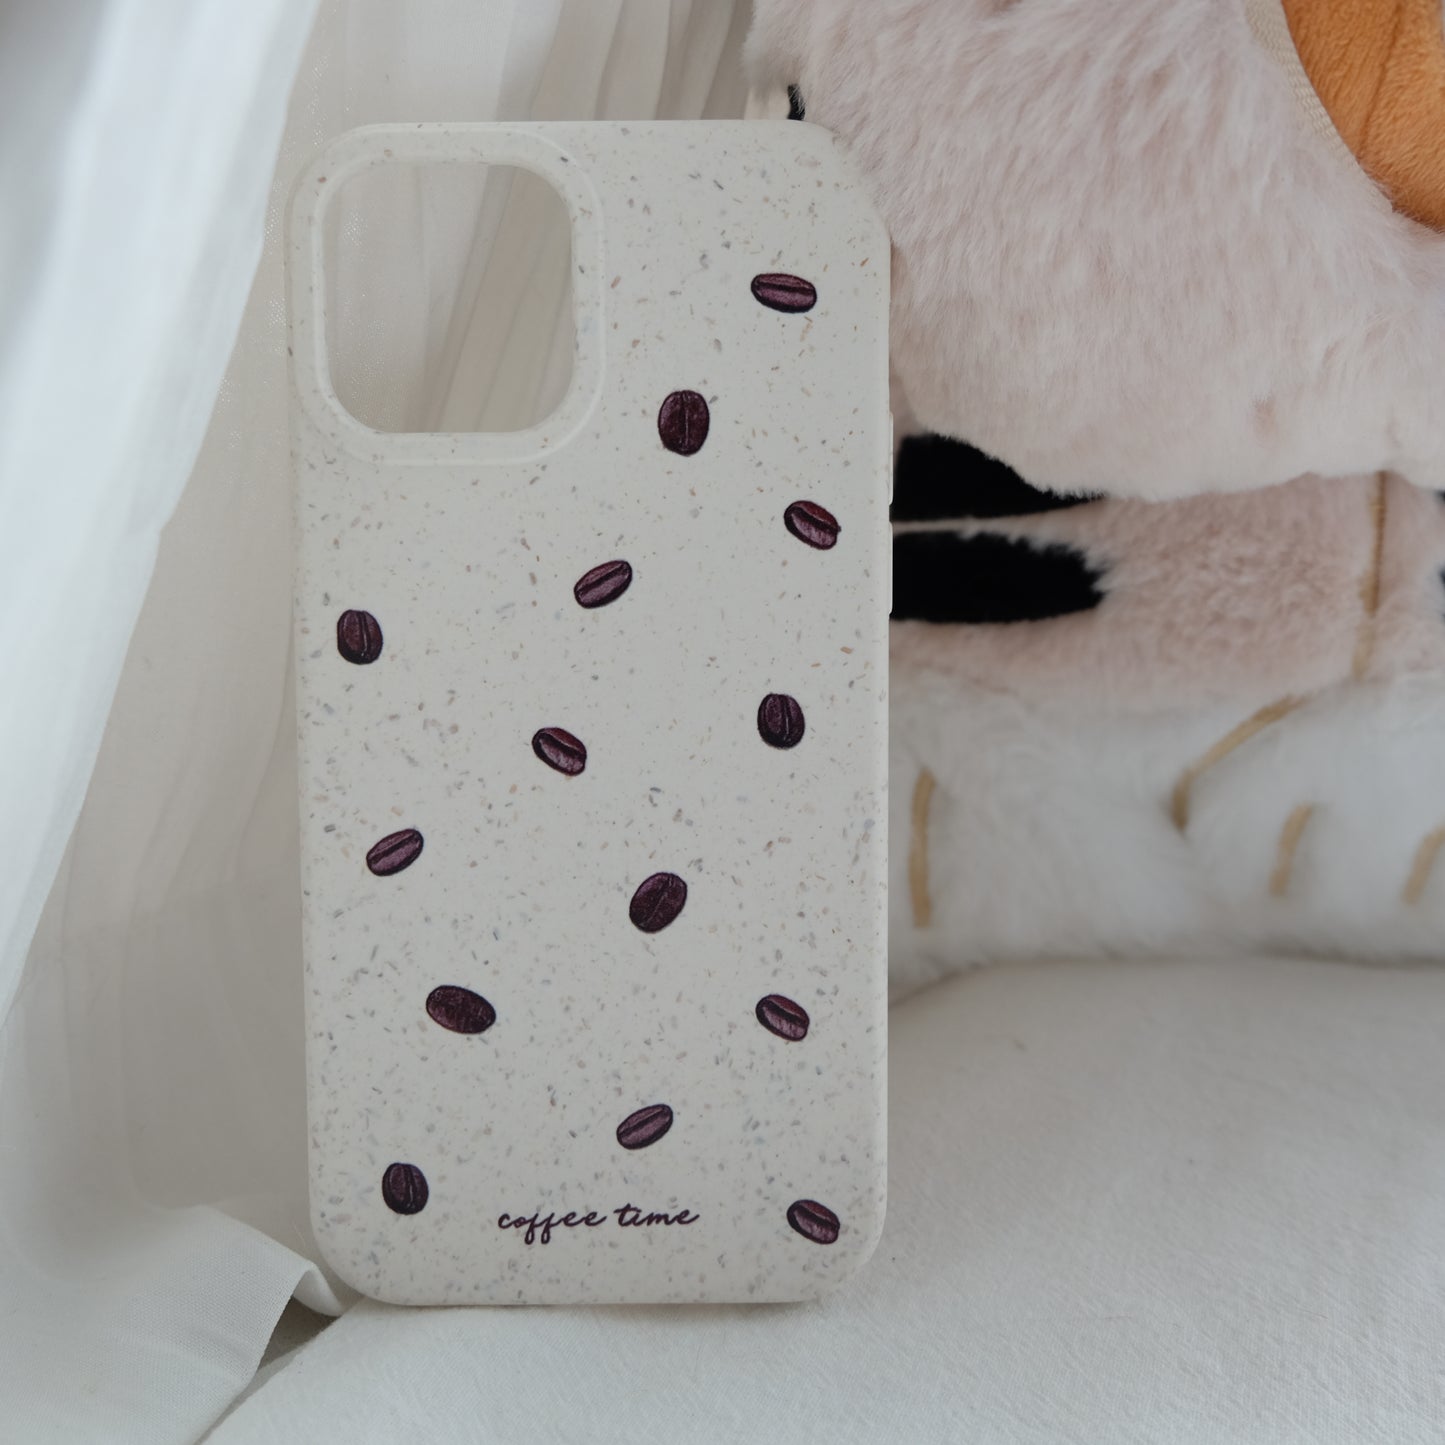 Coffee beans degradable phone case